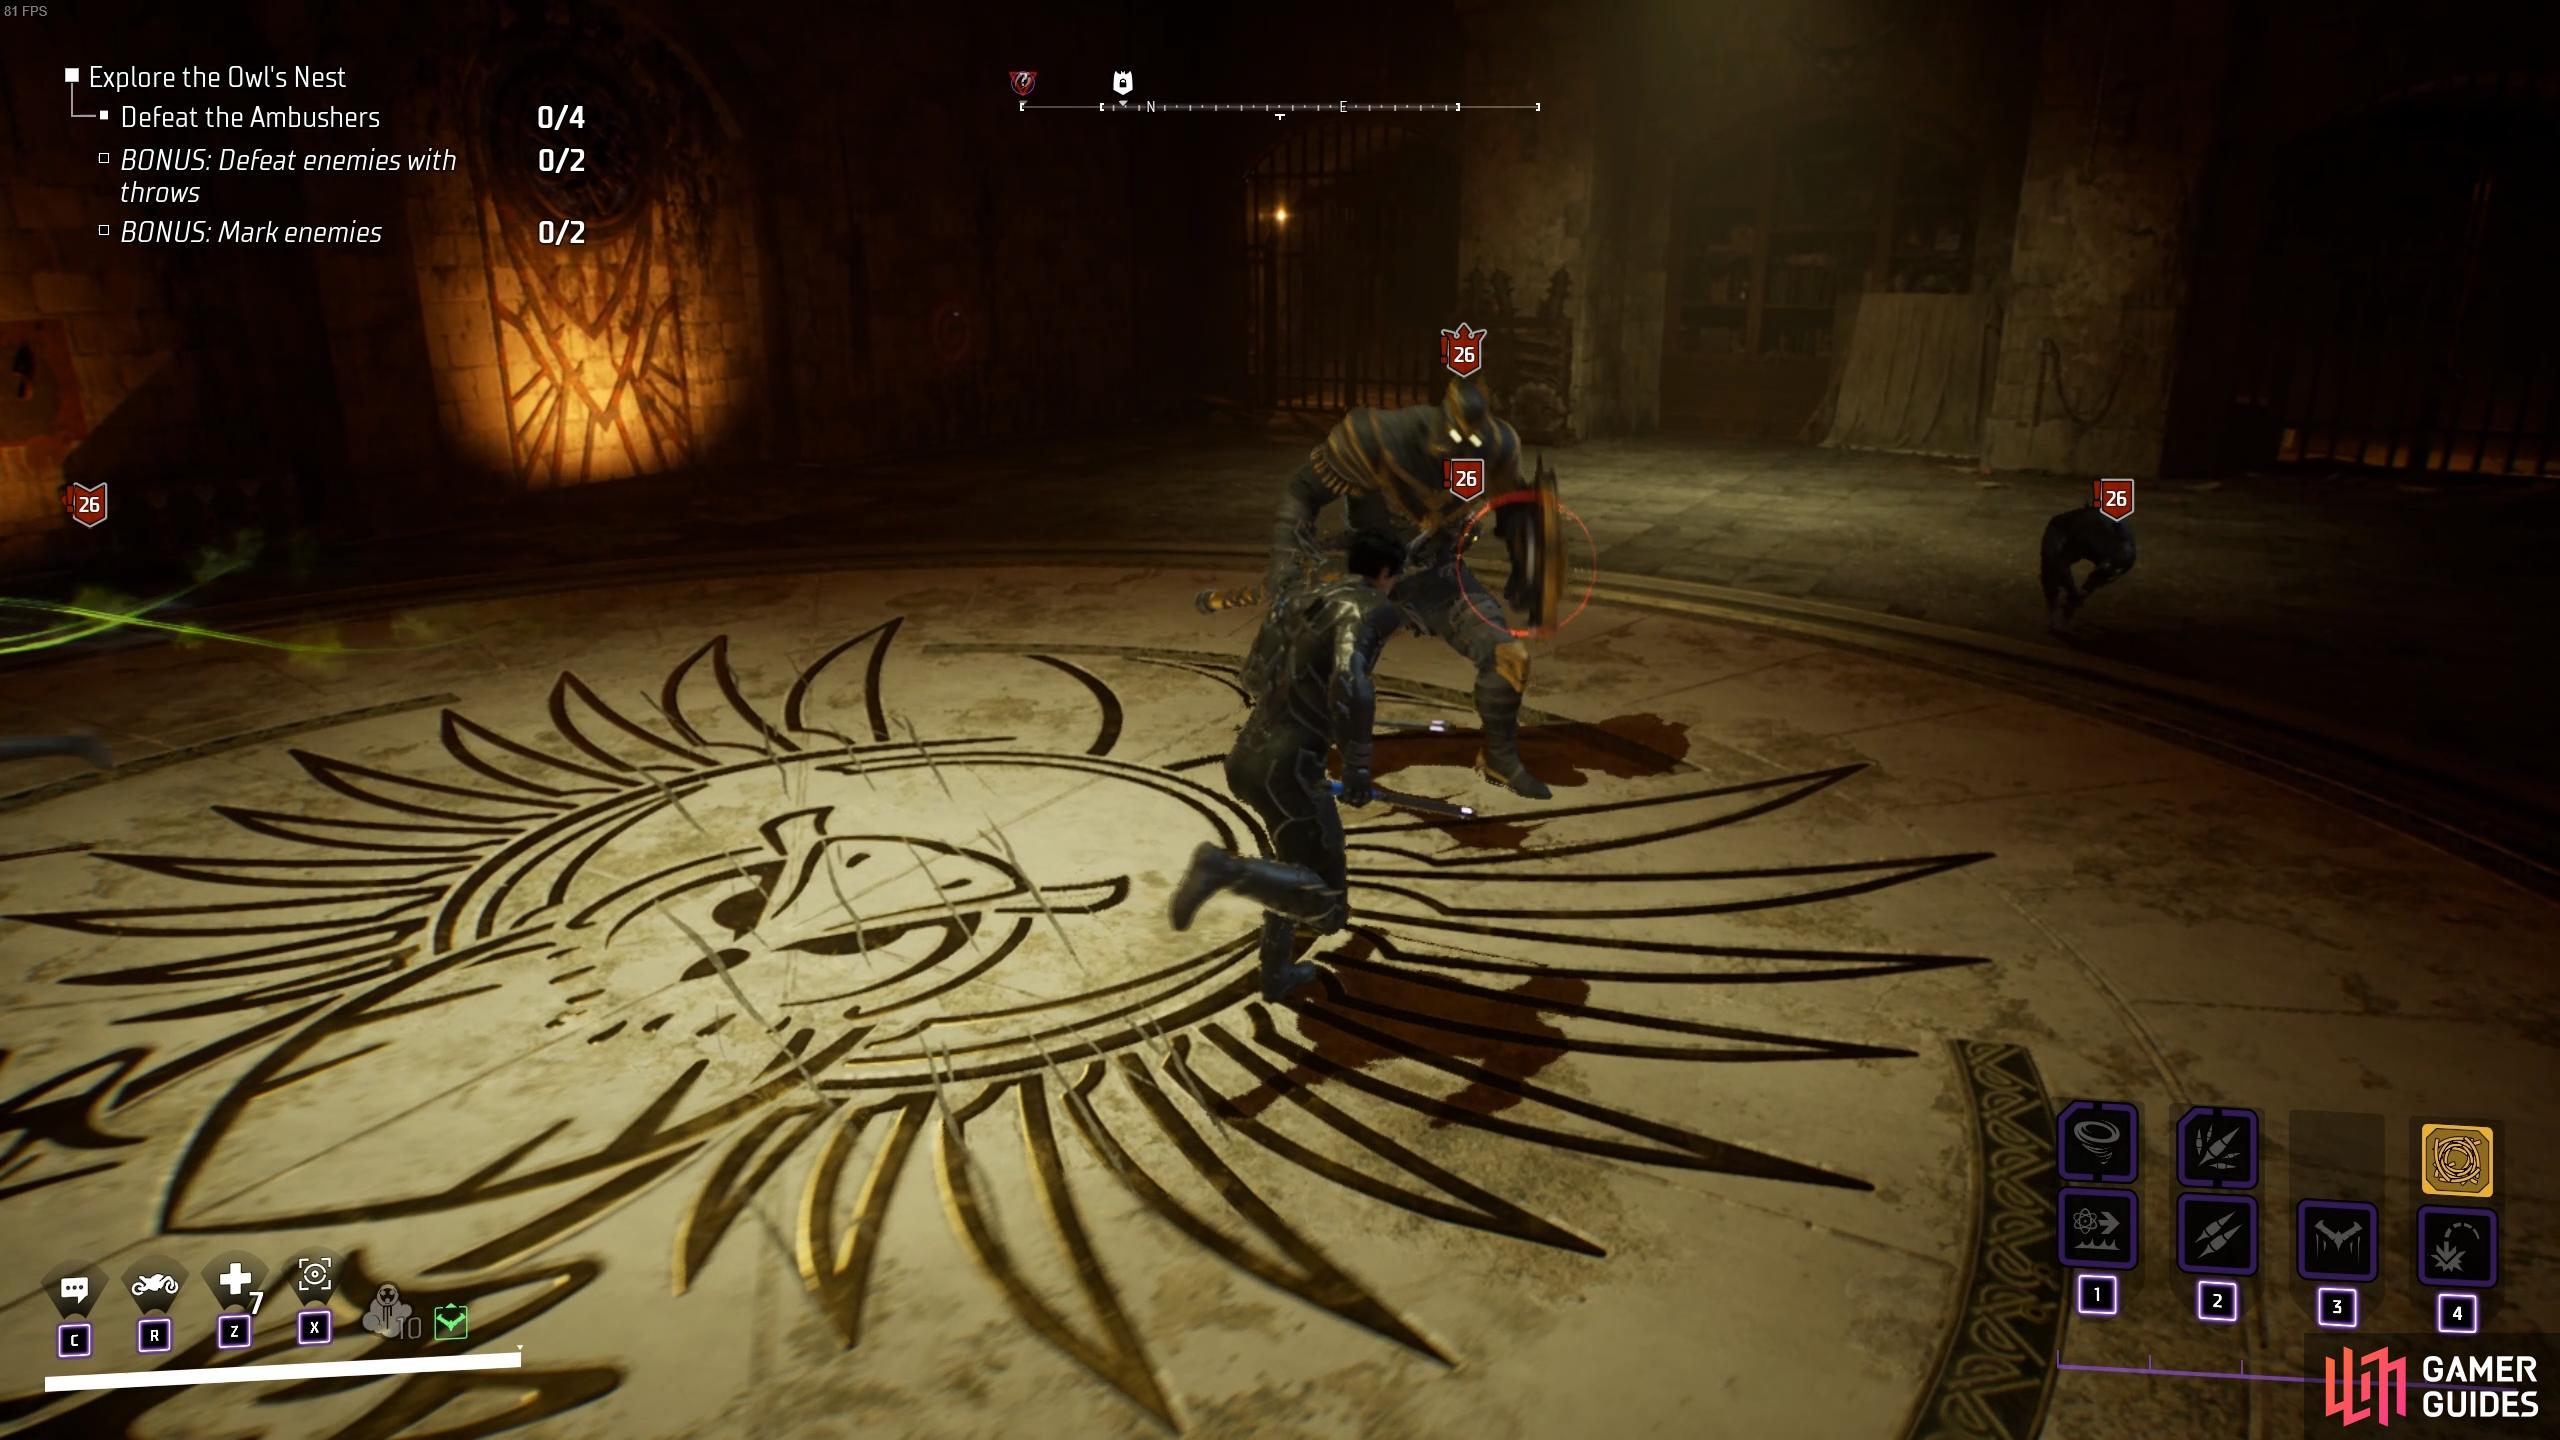 Look out for the red circle around the hands of the enemies, indicating an incoming unblockable combo.